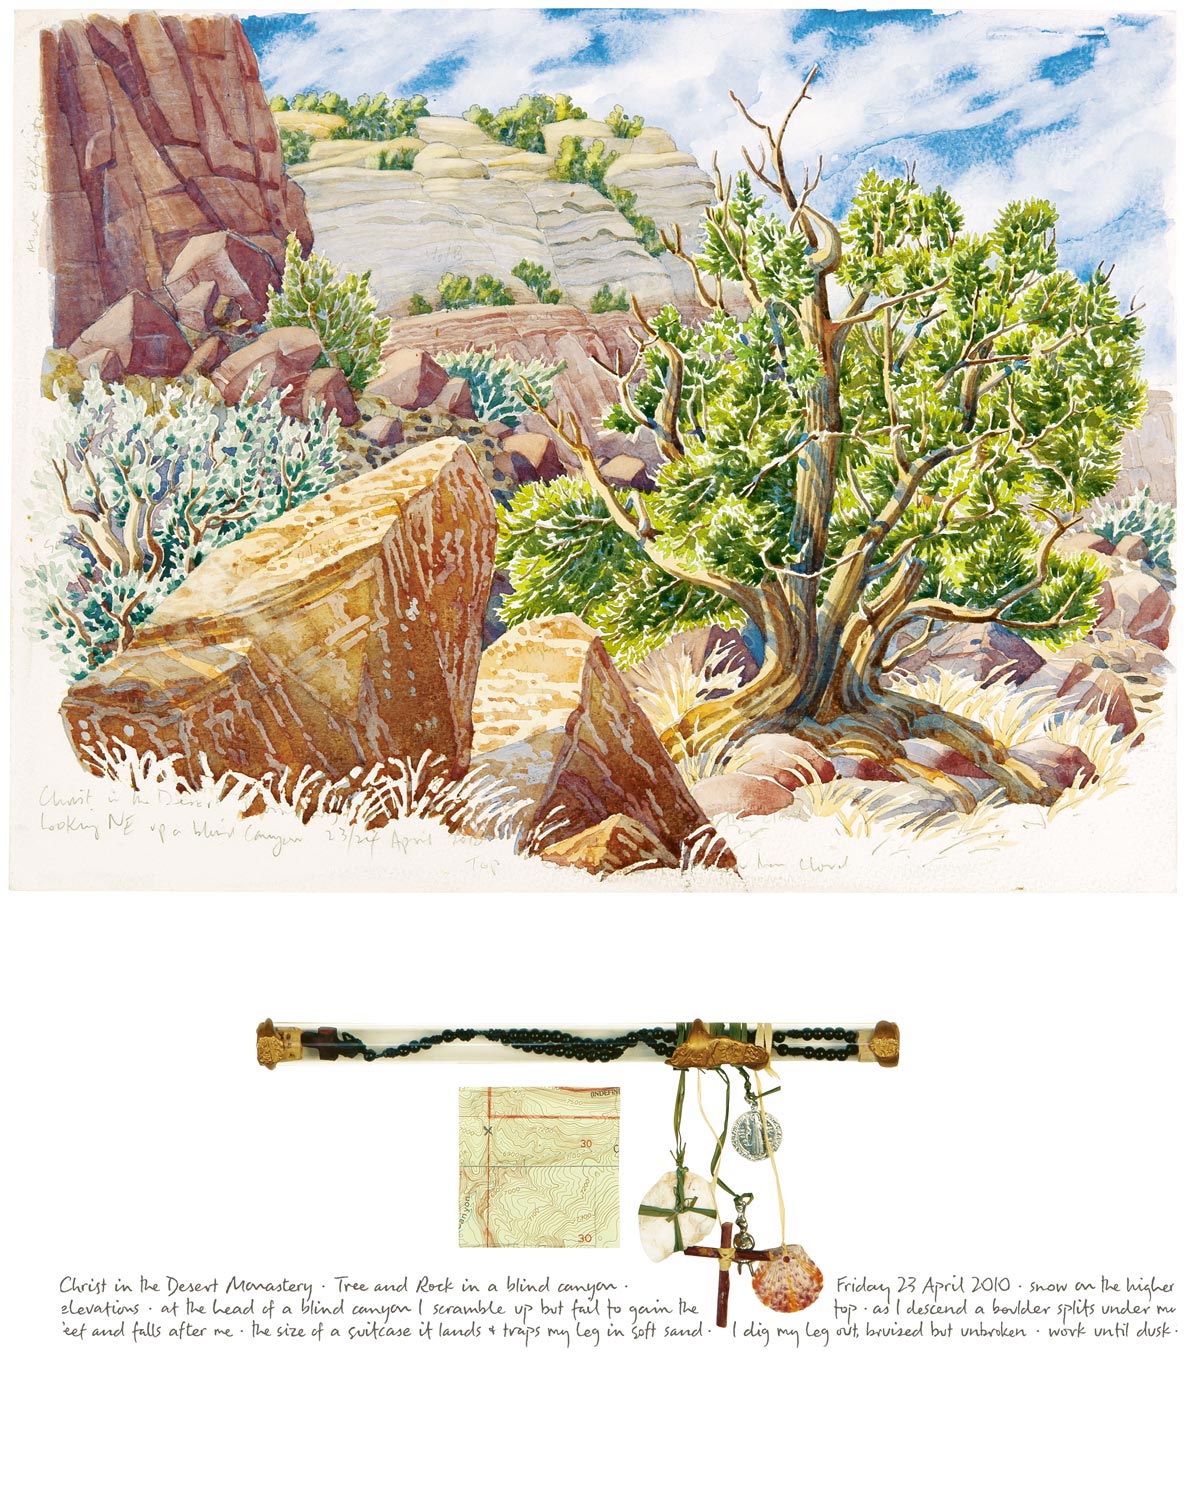   Tony Foster ,  Christ in the Desert Monastery, Tree and Rock in a Blind Canyon , 2010 